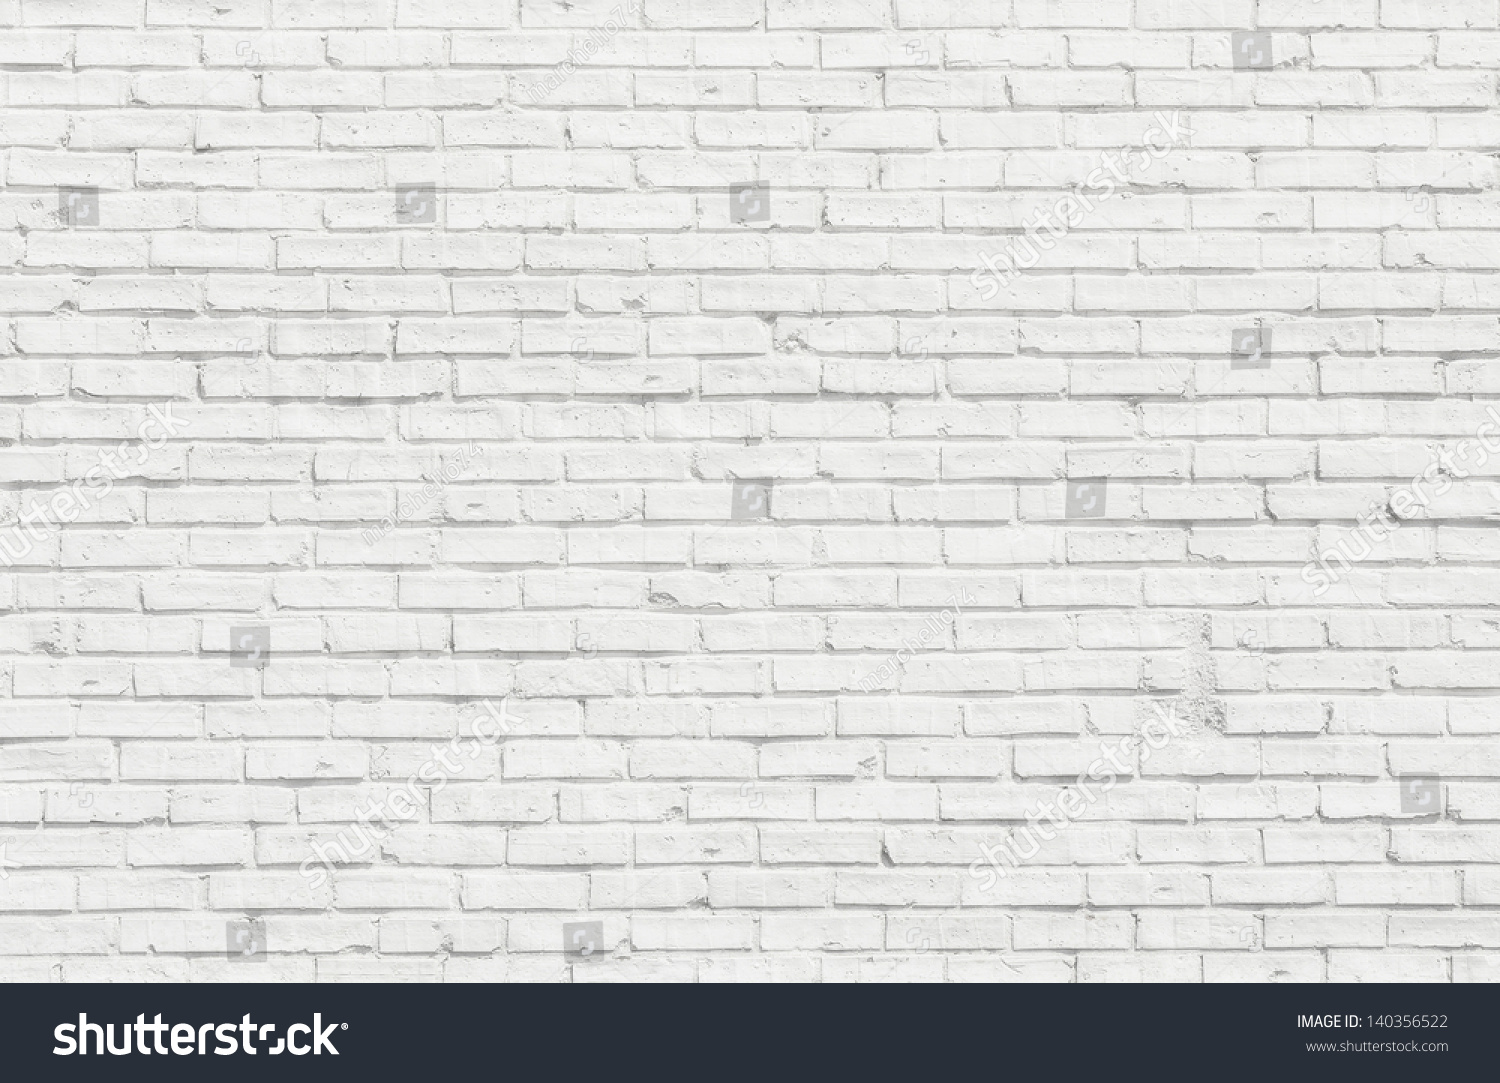 White misty brick wall for background or texture #140356522